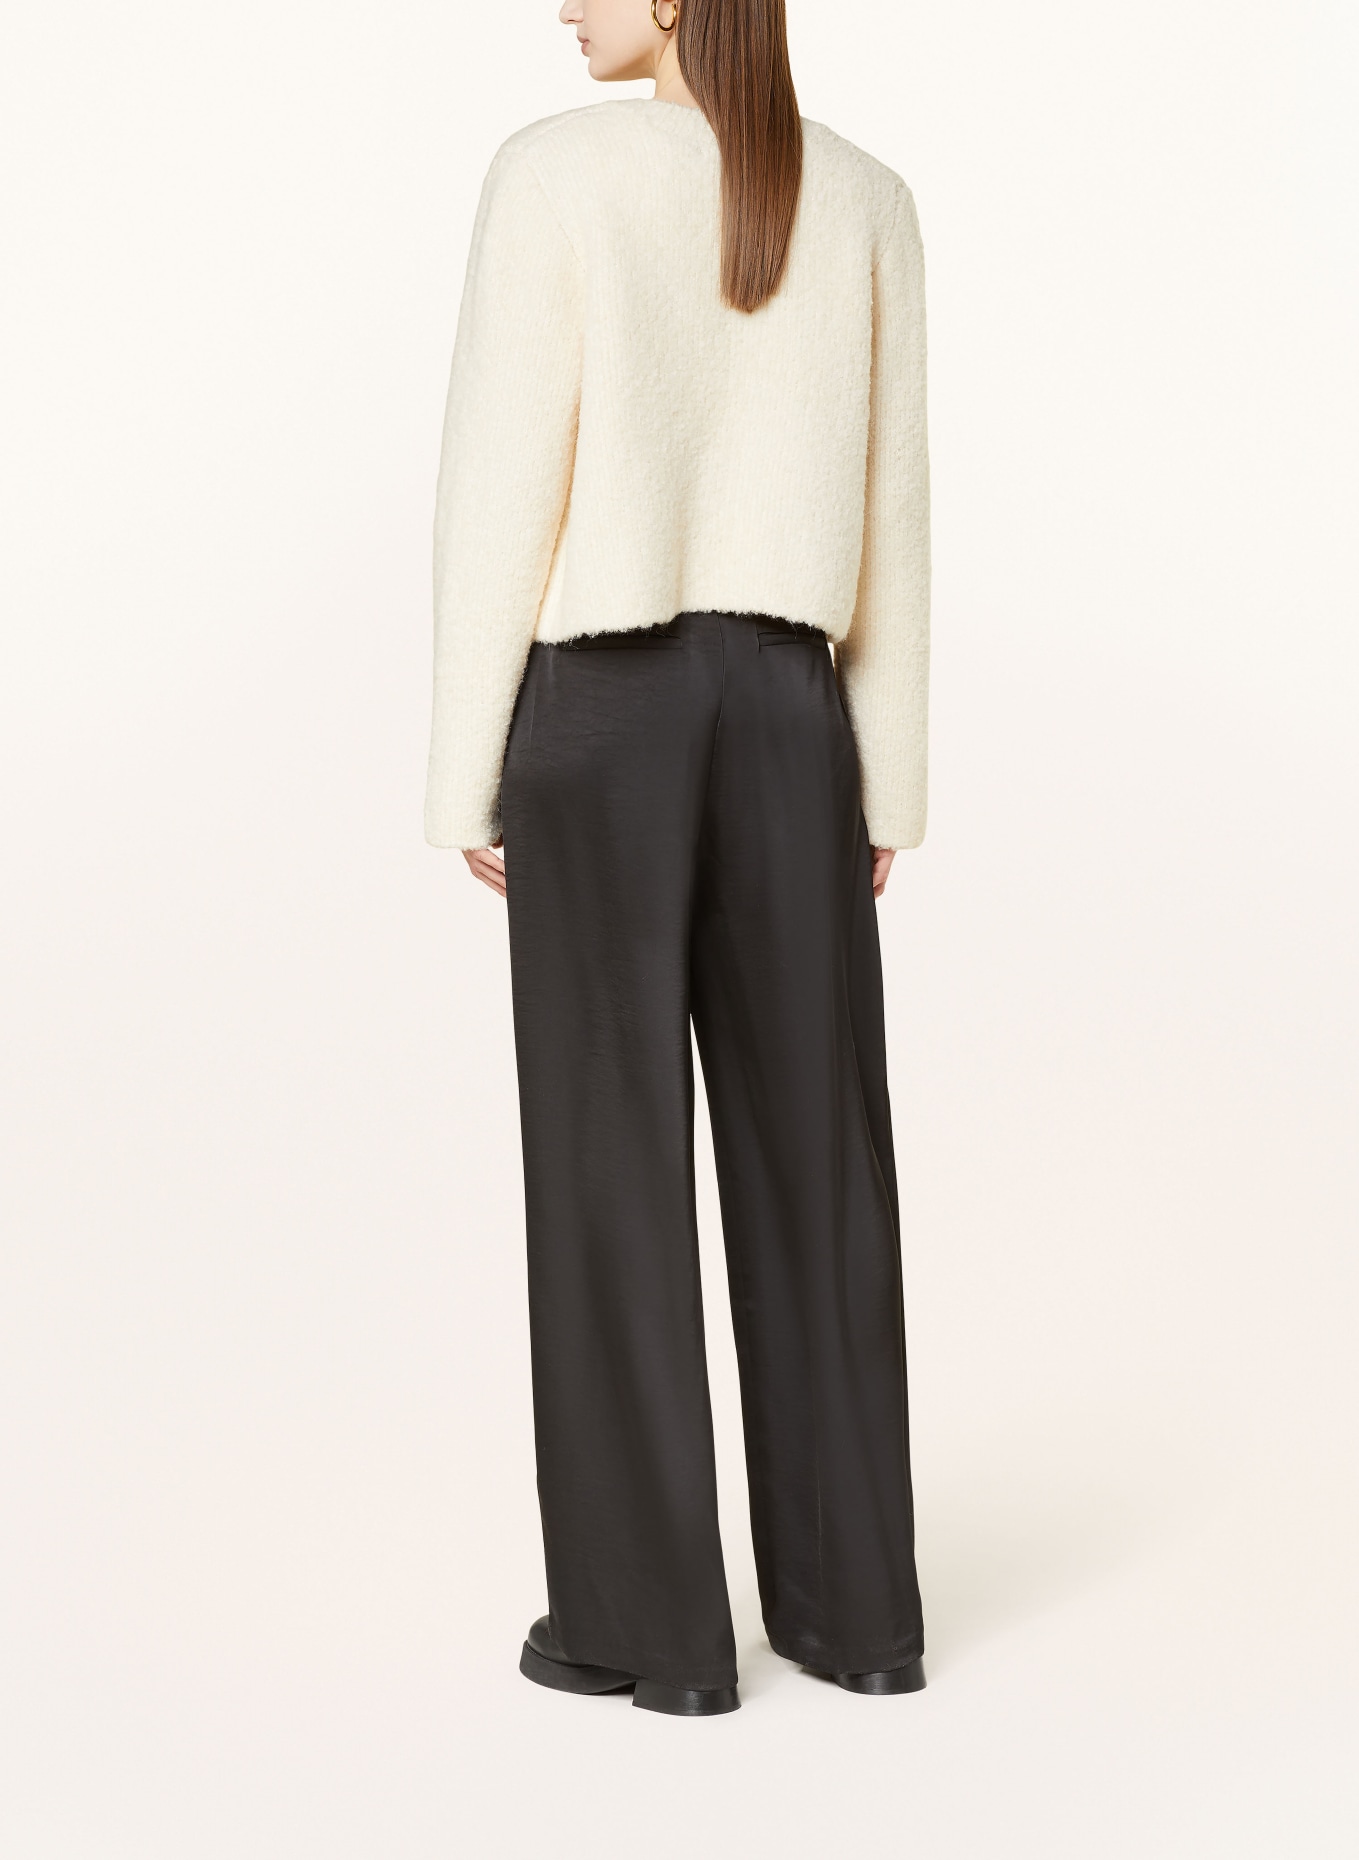 gina tricot Knit cardigan, Color: WHITE (Image 3)